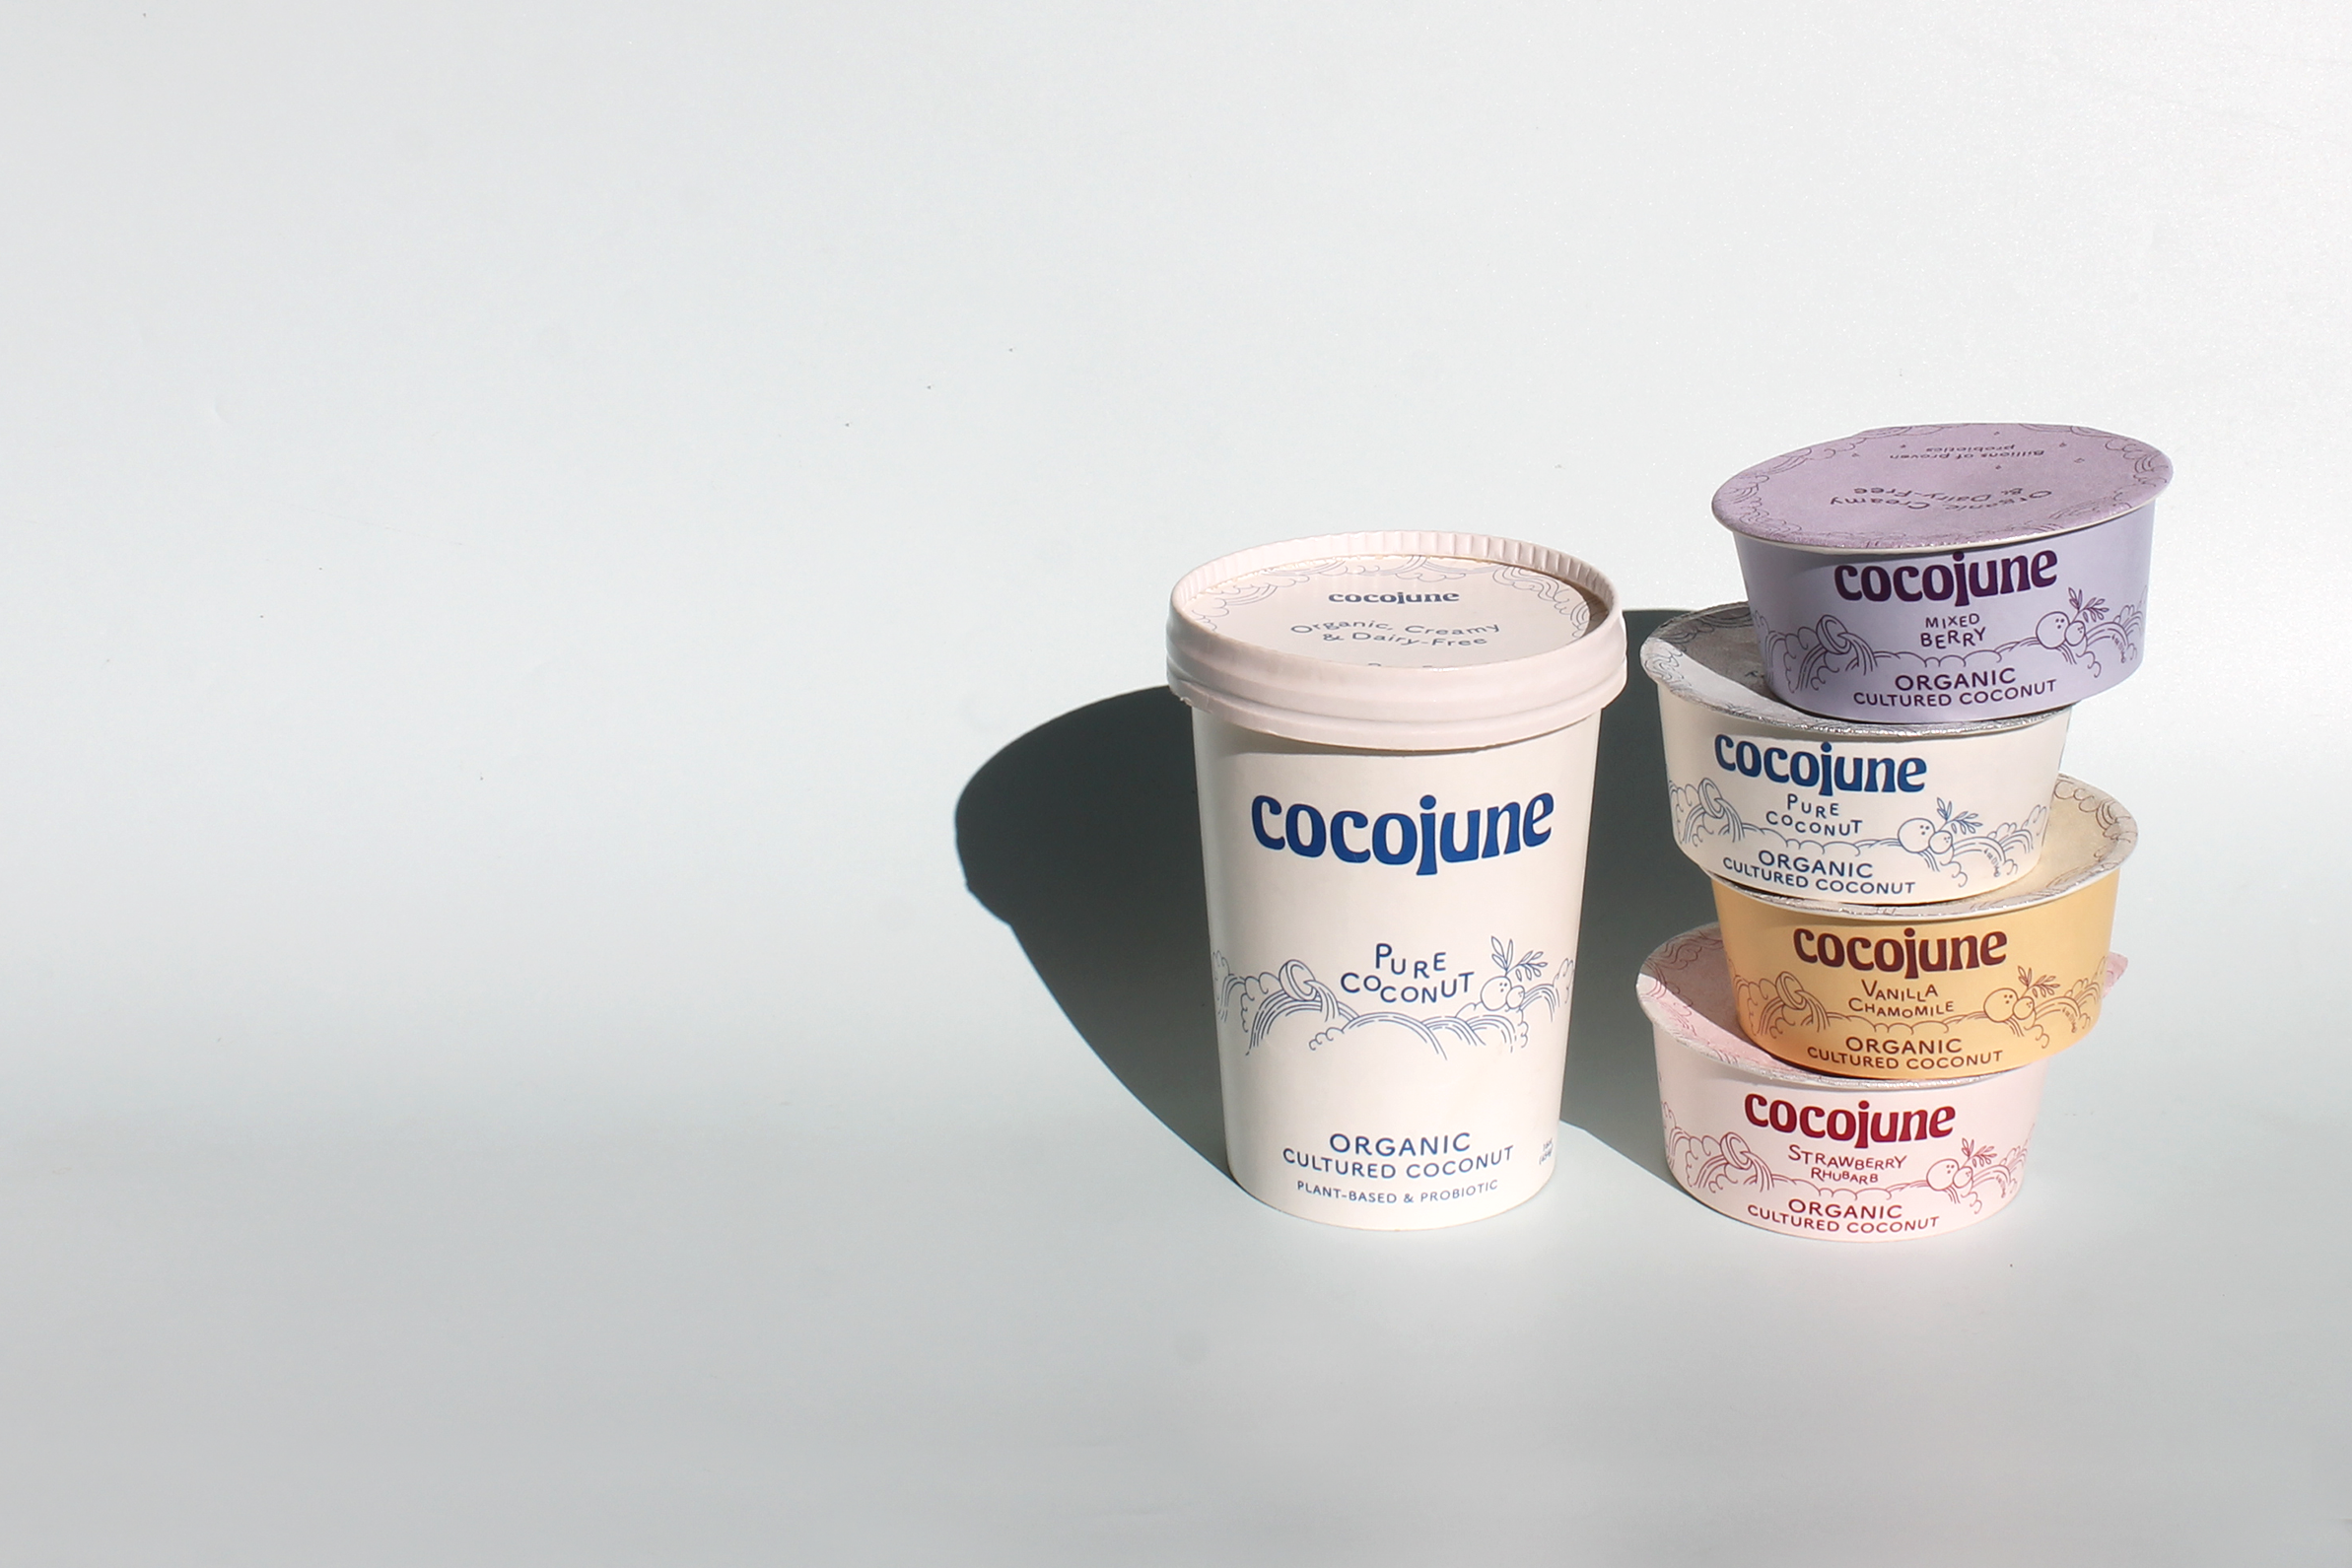 cocojune is coming to Kroger and Albertsons stores around the country.